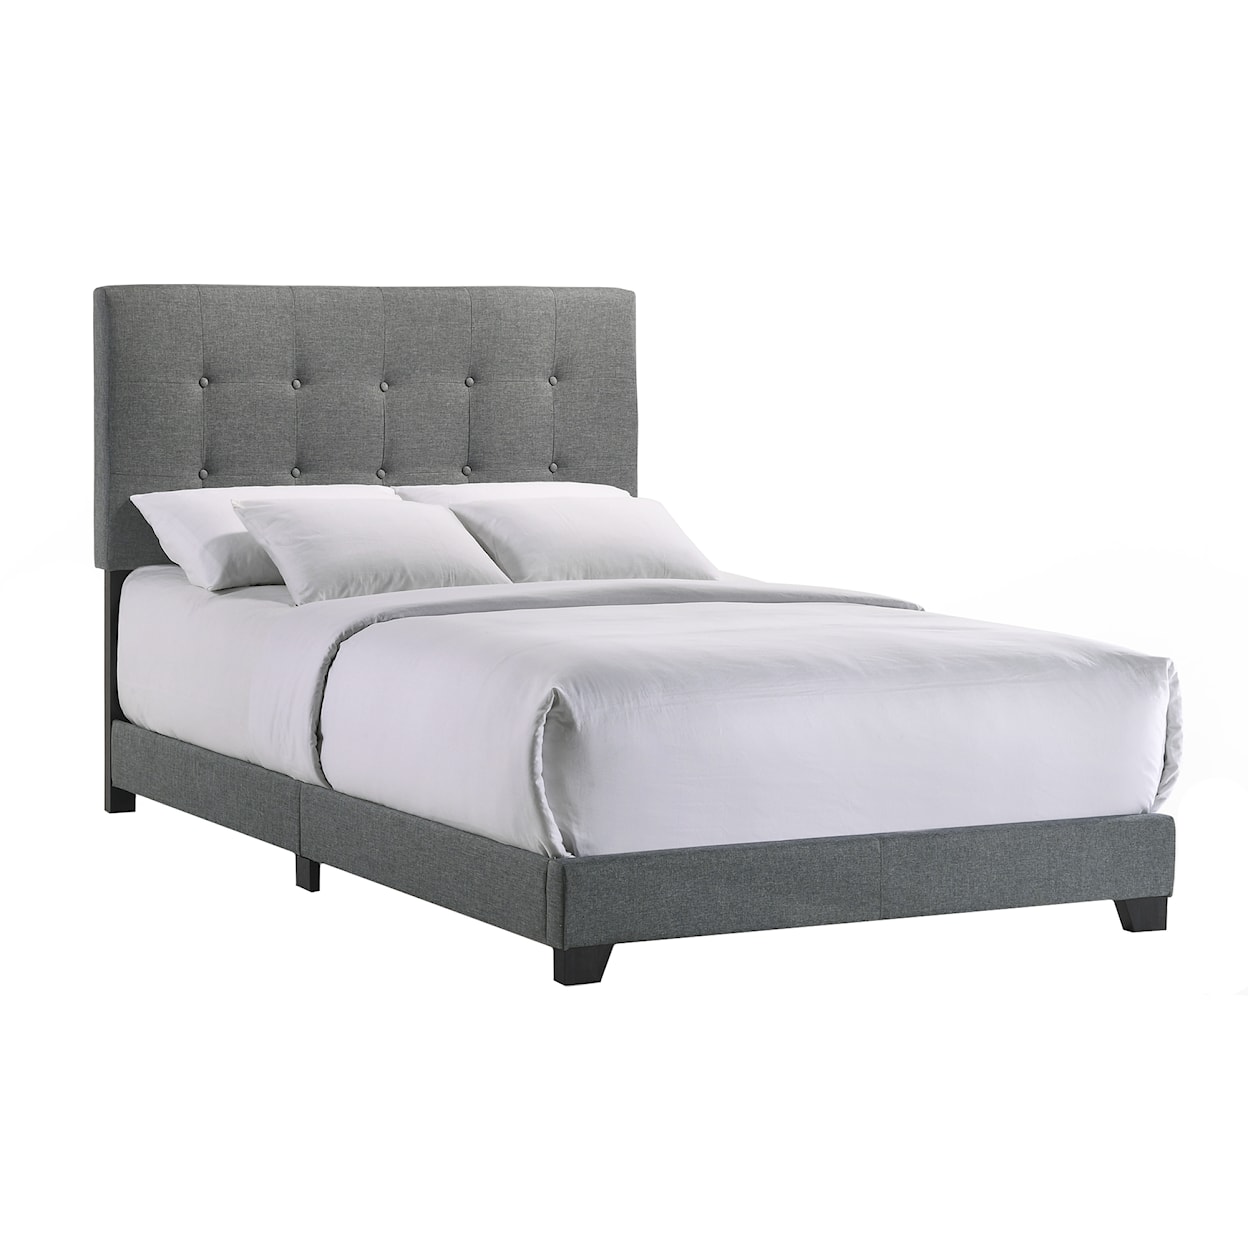 Intercon Upholstered Beds Addyson Full Upholstered Bed